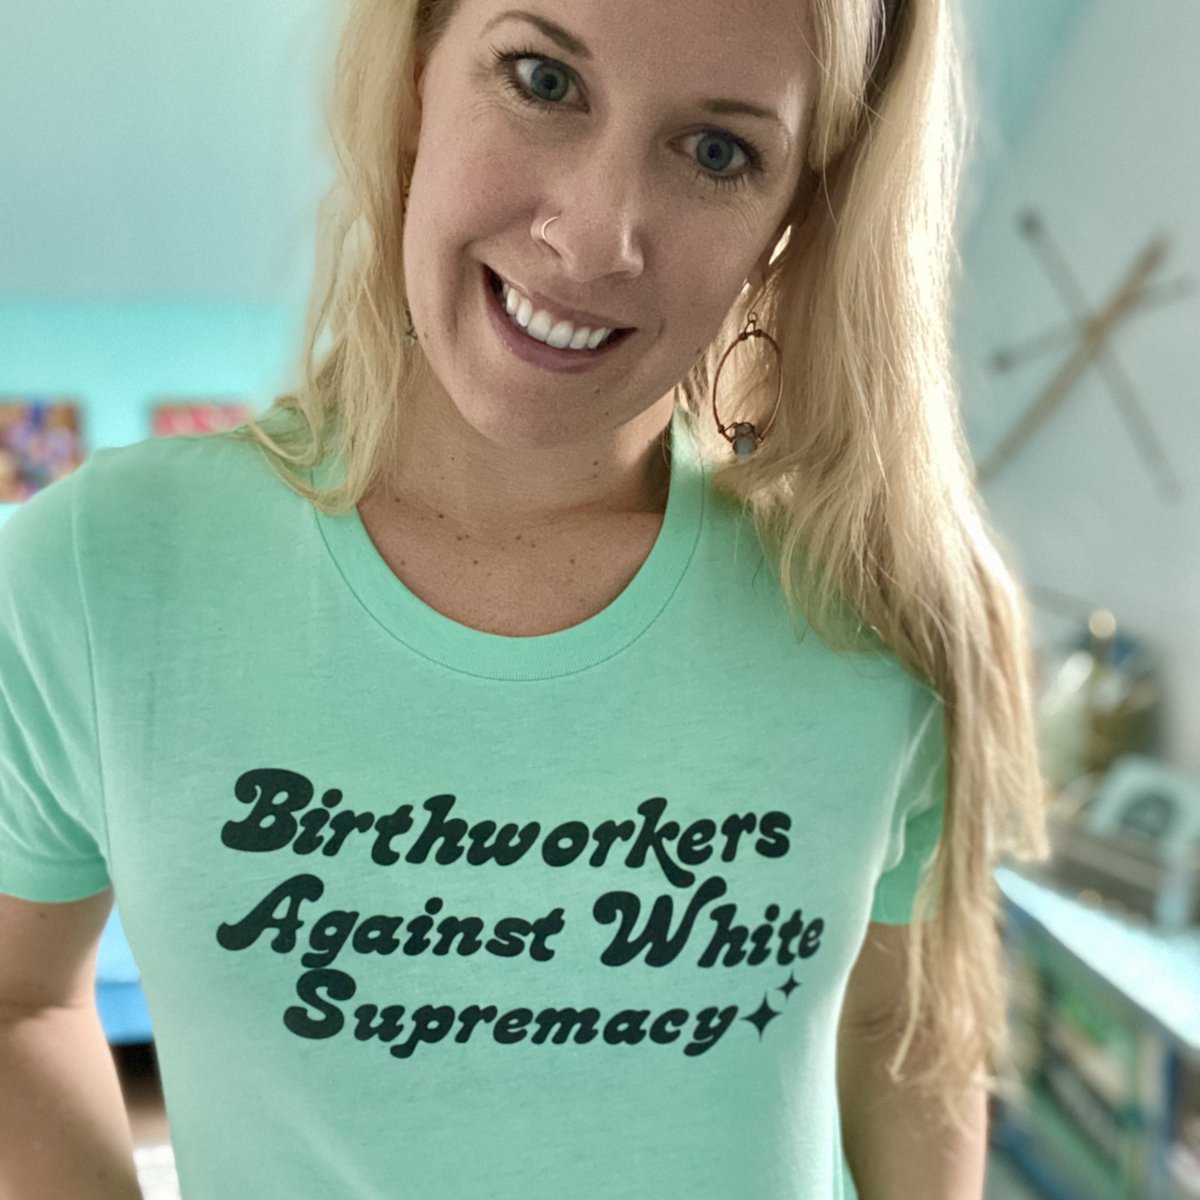 As @chinatolliver says: “Today is a great day to stand against white supremacy”. Go support the art and designs of China at RiseUpMidwife.com ✨ . . . . ID: 📸@nurturely founder Emily Little with teal “Birthworkers against white supremacy” tee by @chinatolliver